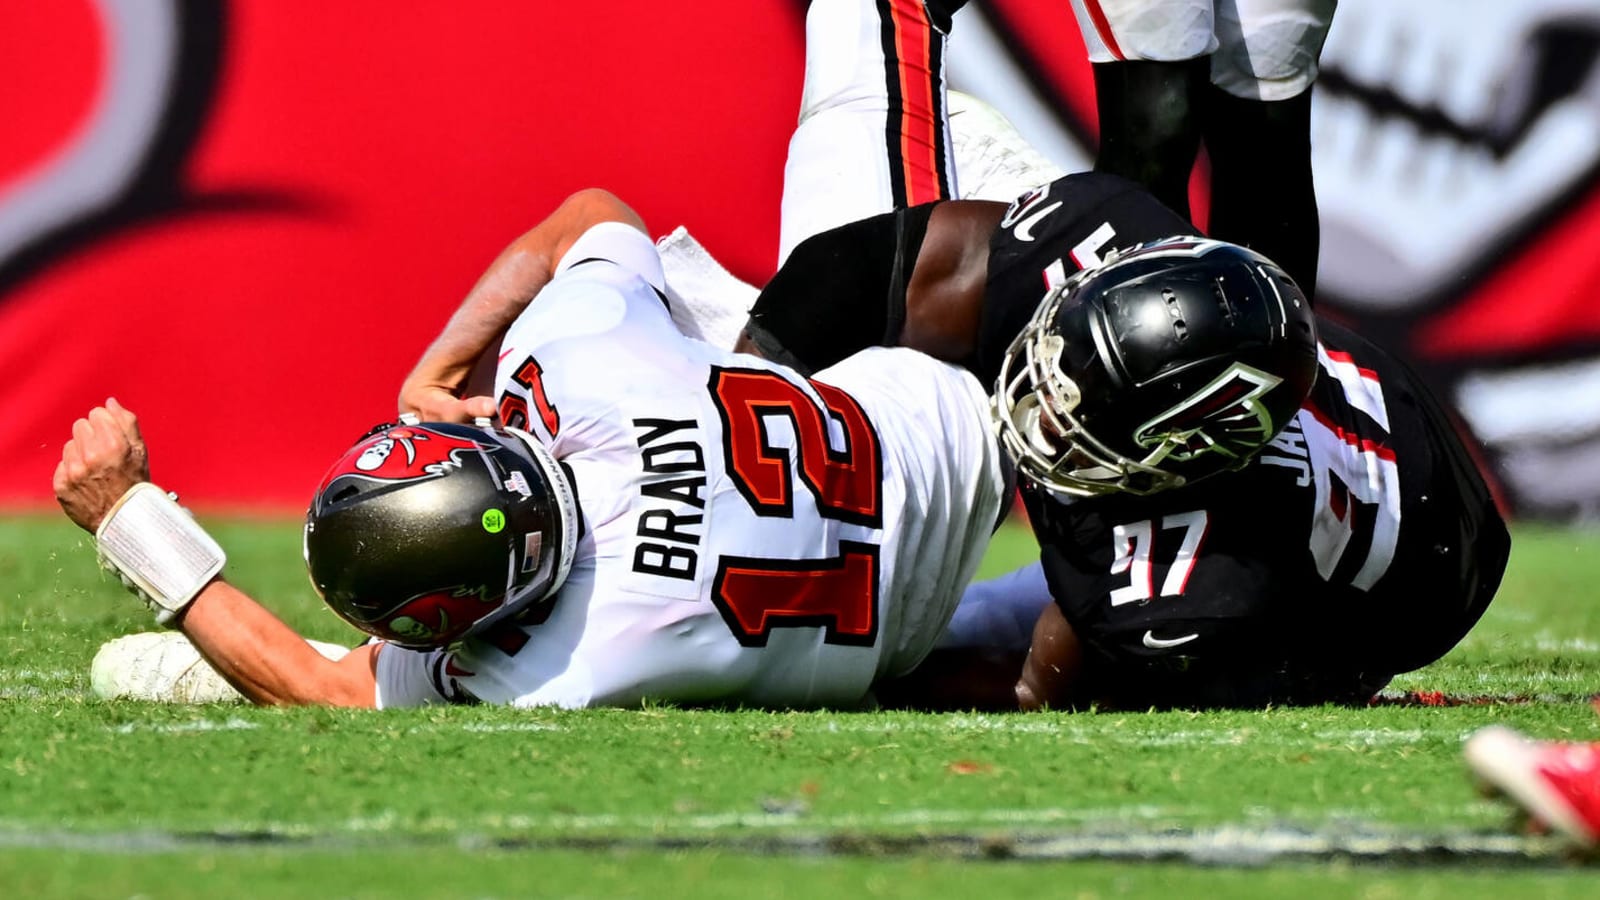 Horrible roughing-the-passer call mars ending of Bucs-Falcons